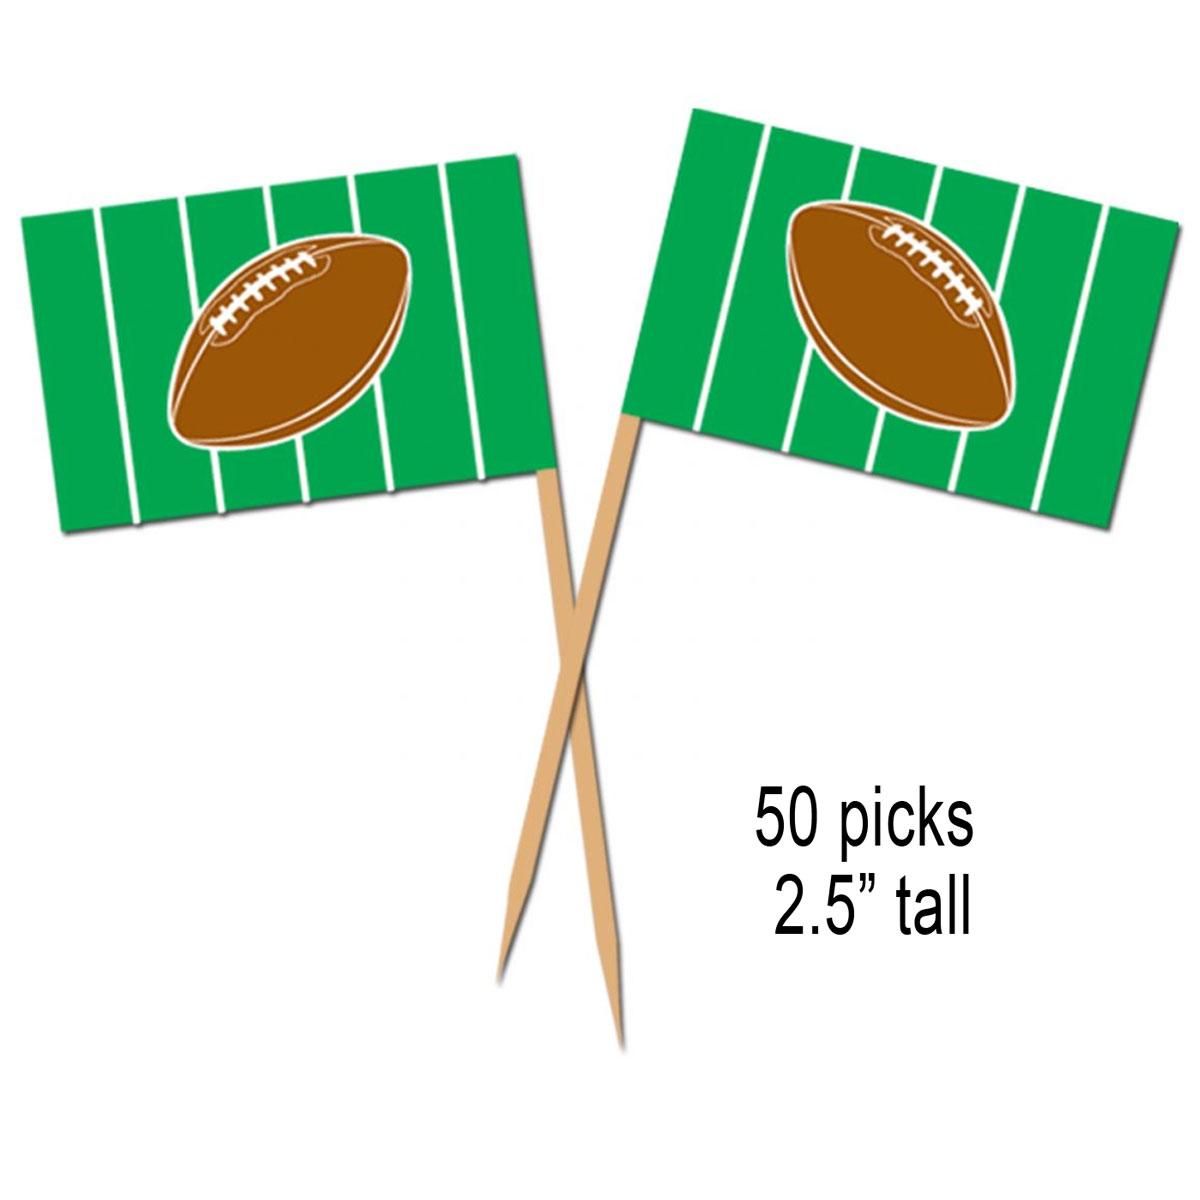 NFL American Football Picks - 50pcs by Besitle 60127 from a collection of American Football picks and tableware here at Karnival Costumes online party shop